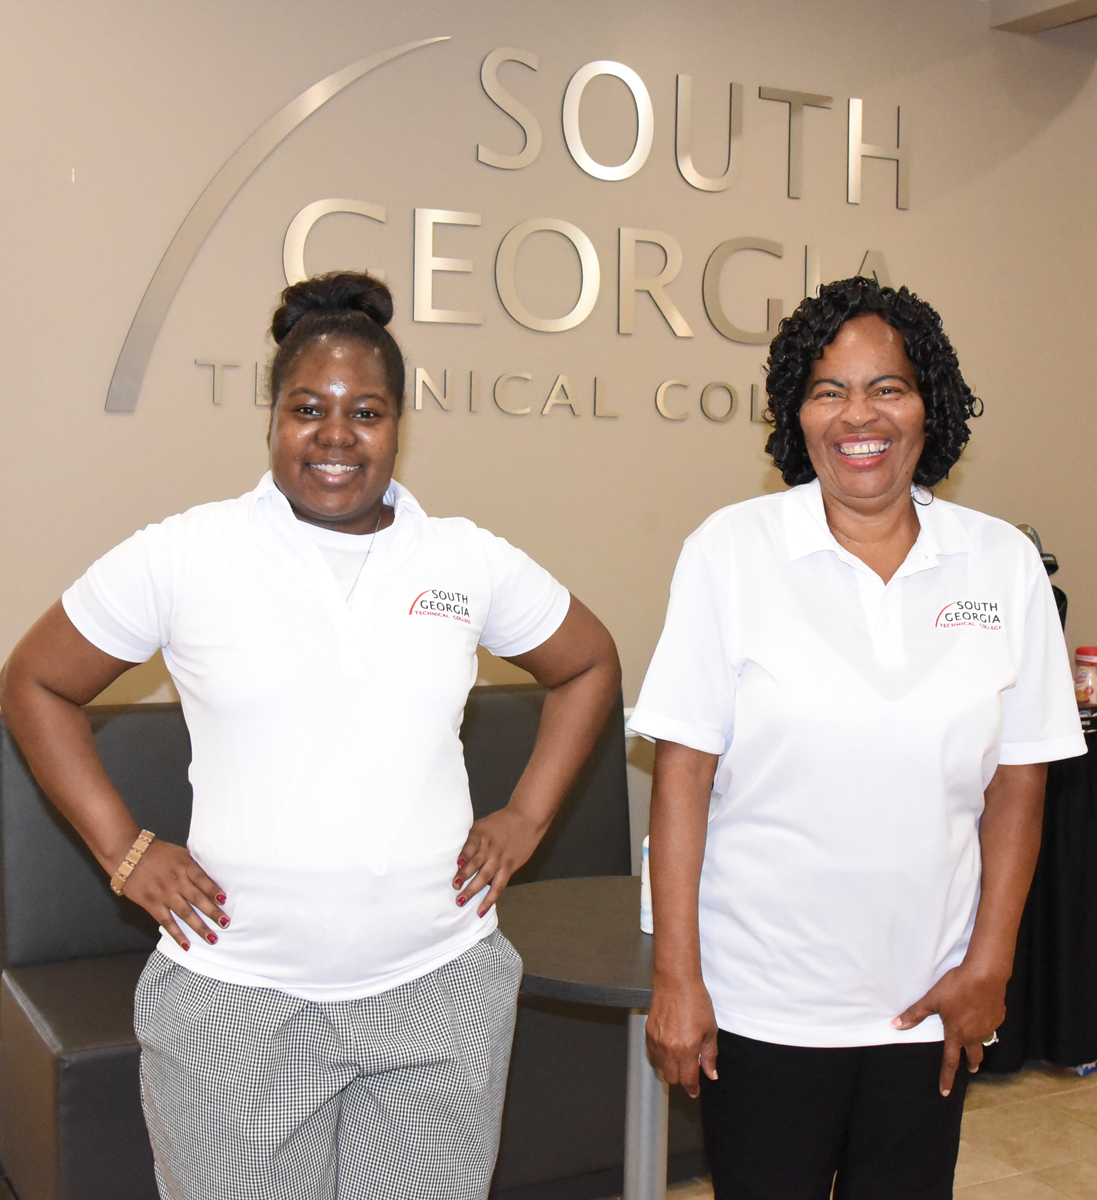 Janelle Dodson (left) and her grandmother, Alice Bridges (right), are both enrolled in the SGTC Culinary Arts program this summer.